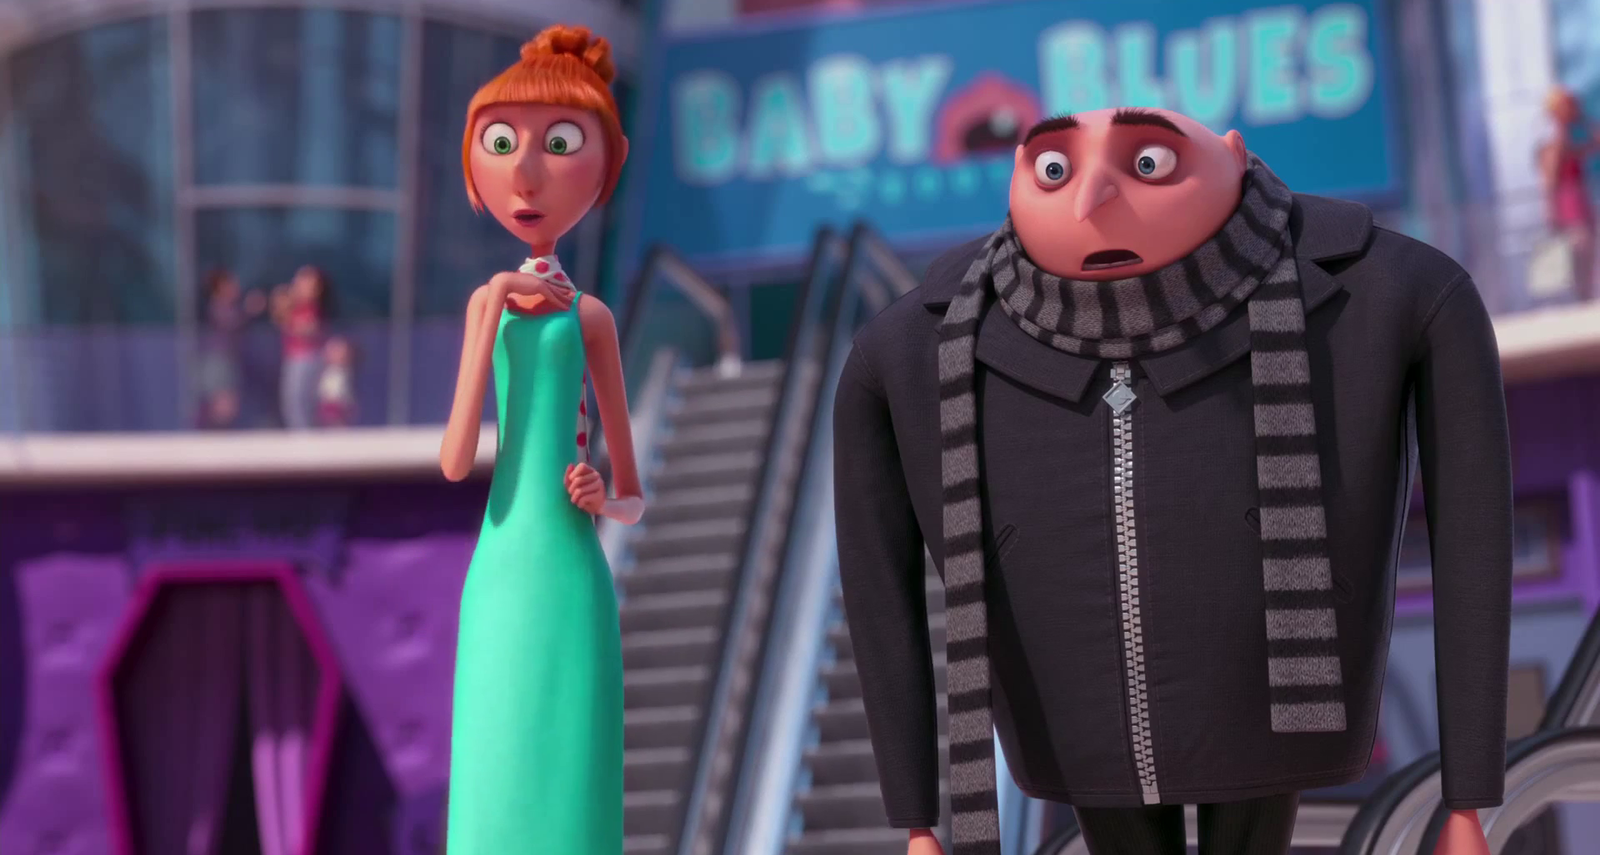 Gru From "Despicable Me" Is 14 Feet Tall, I Kid You Not